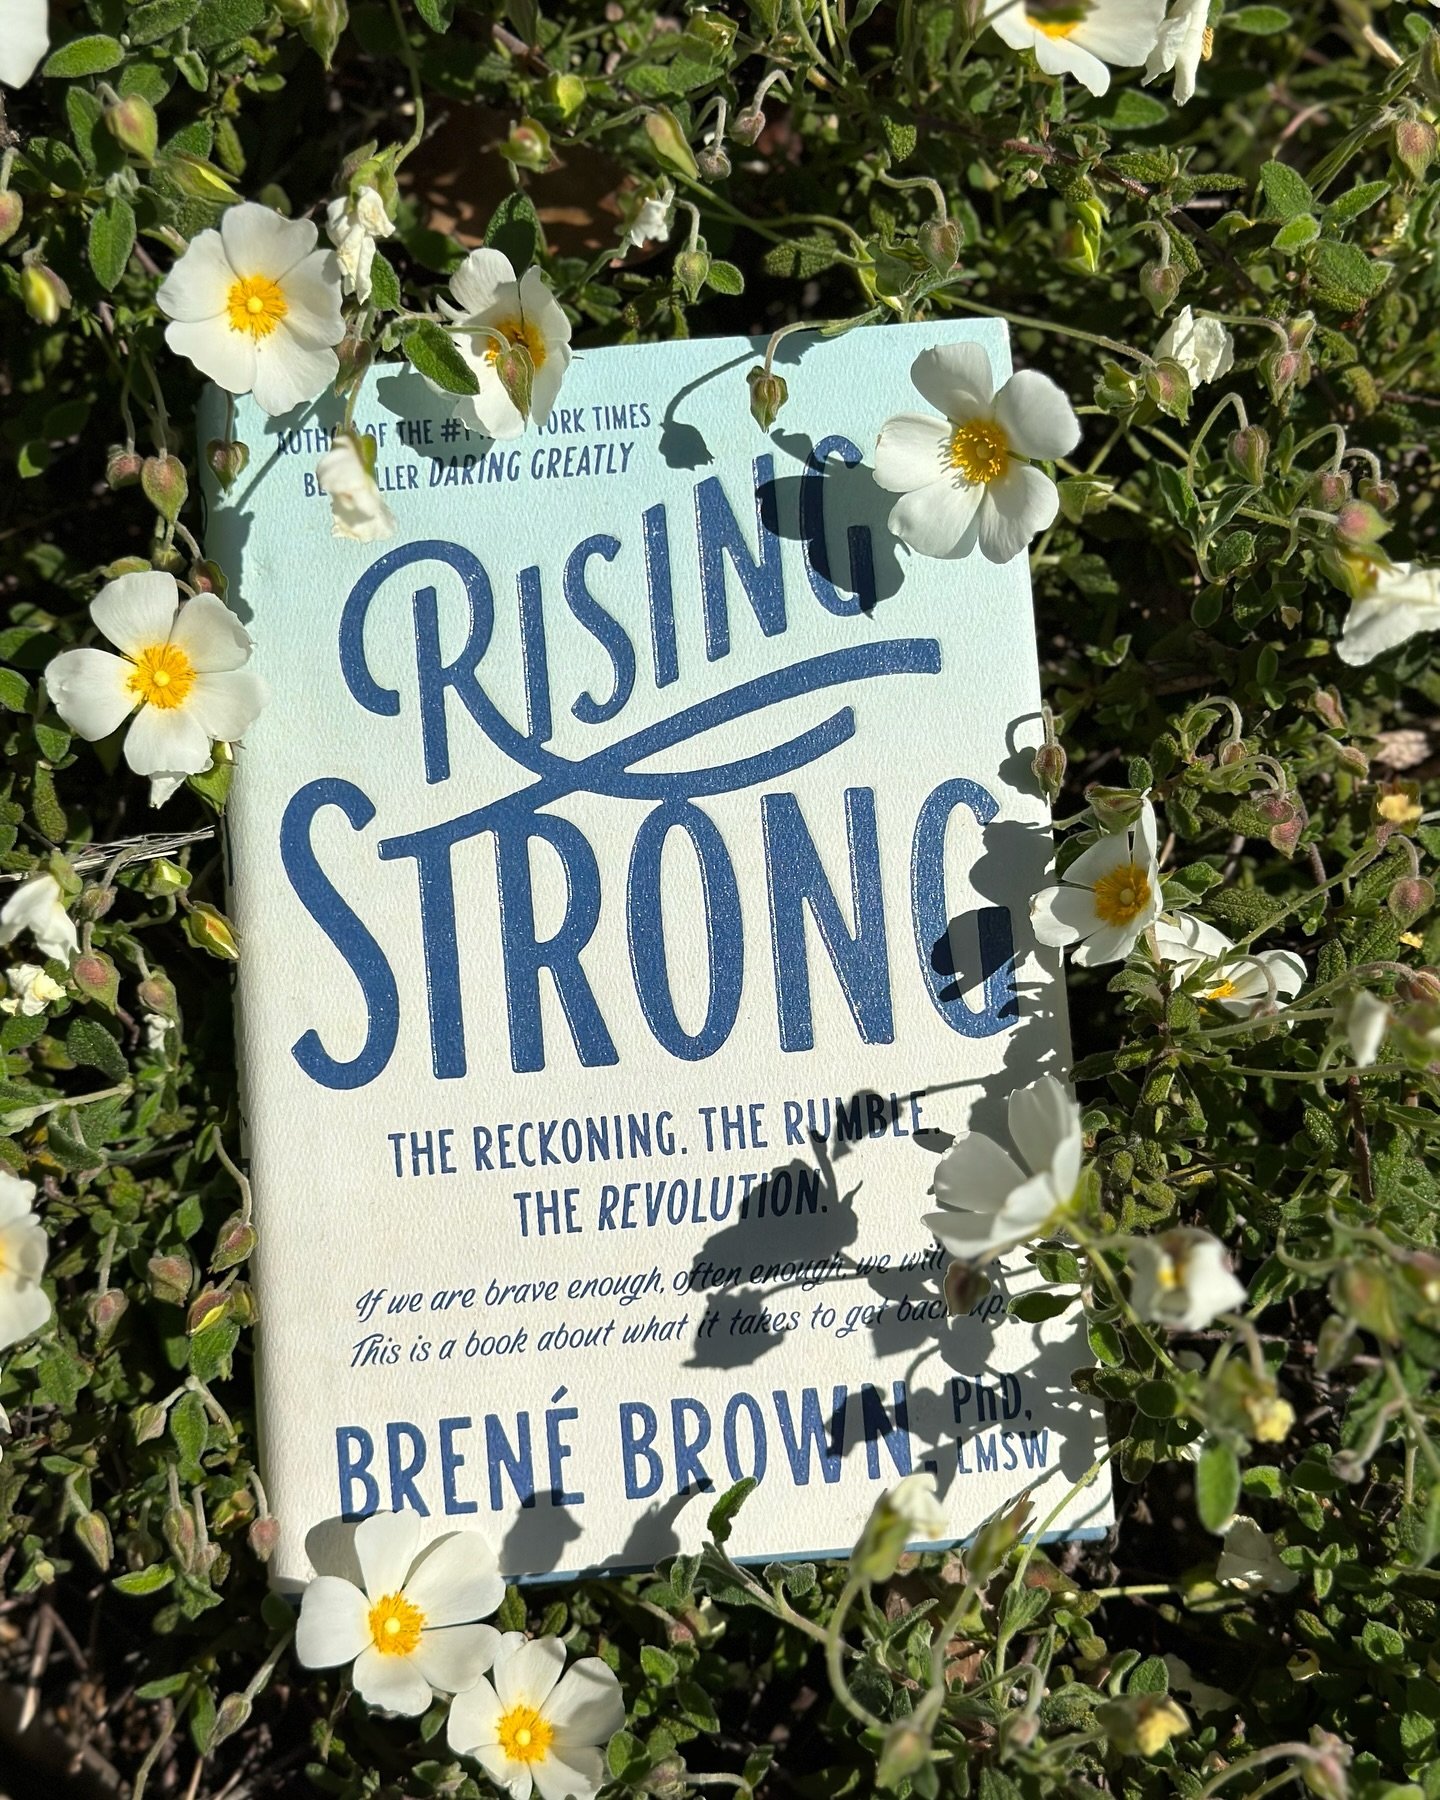 📖 Book of the Month 

Read with us!!! Every Month we will recommend a book that focuses on our monthly intentions.

Book: Rising Strong
Author: Bren&eacute; Brown
My Rating: ⭐️⭐️⭐️⭐️⭐️

Review: This book is a powerful exploration of resilience, vuln